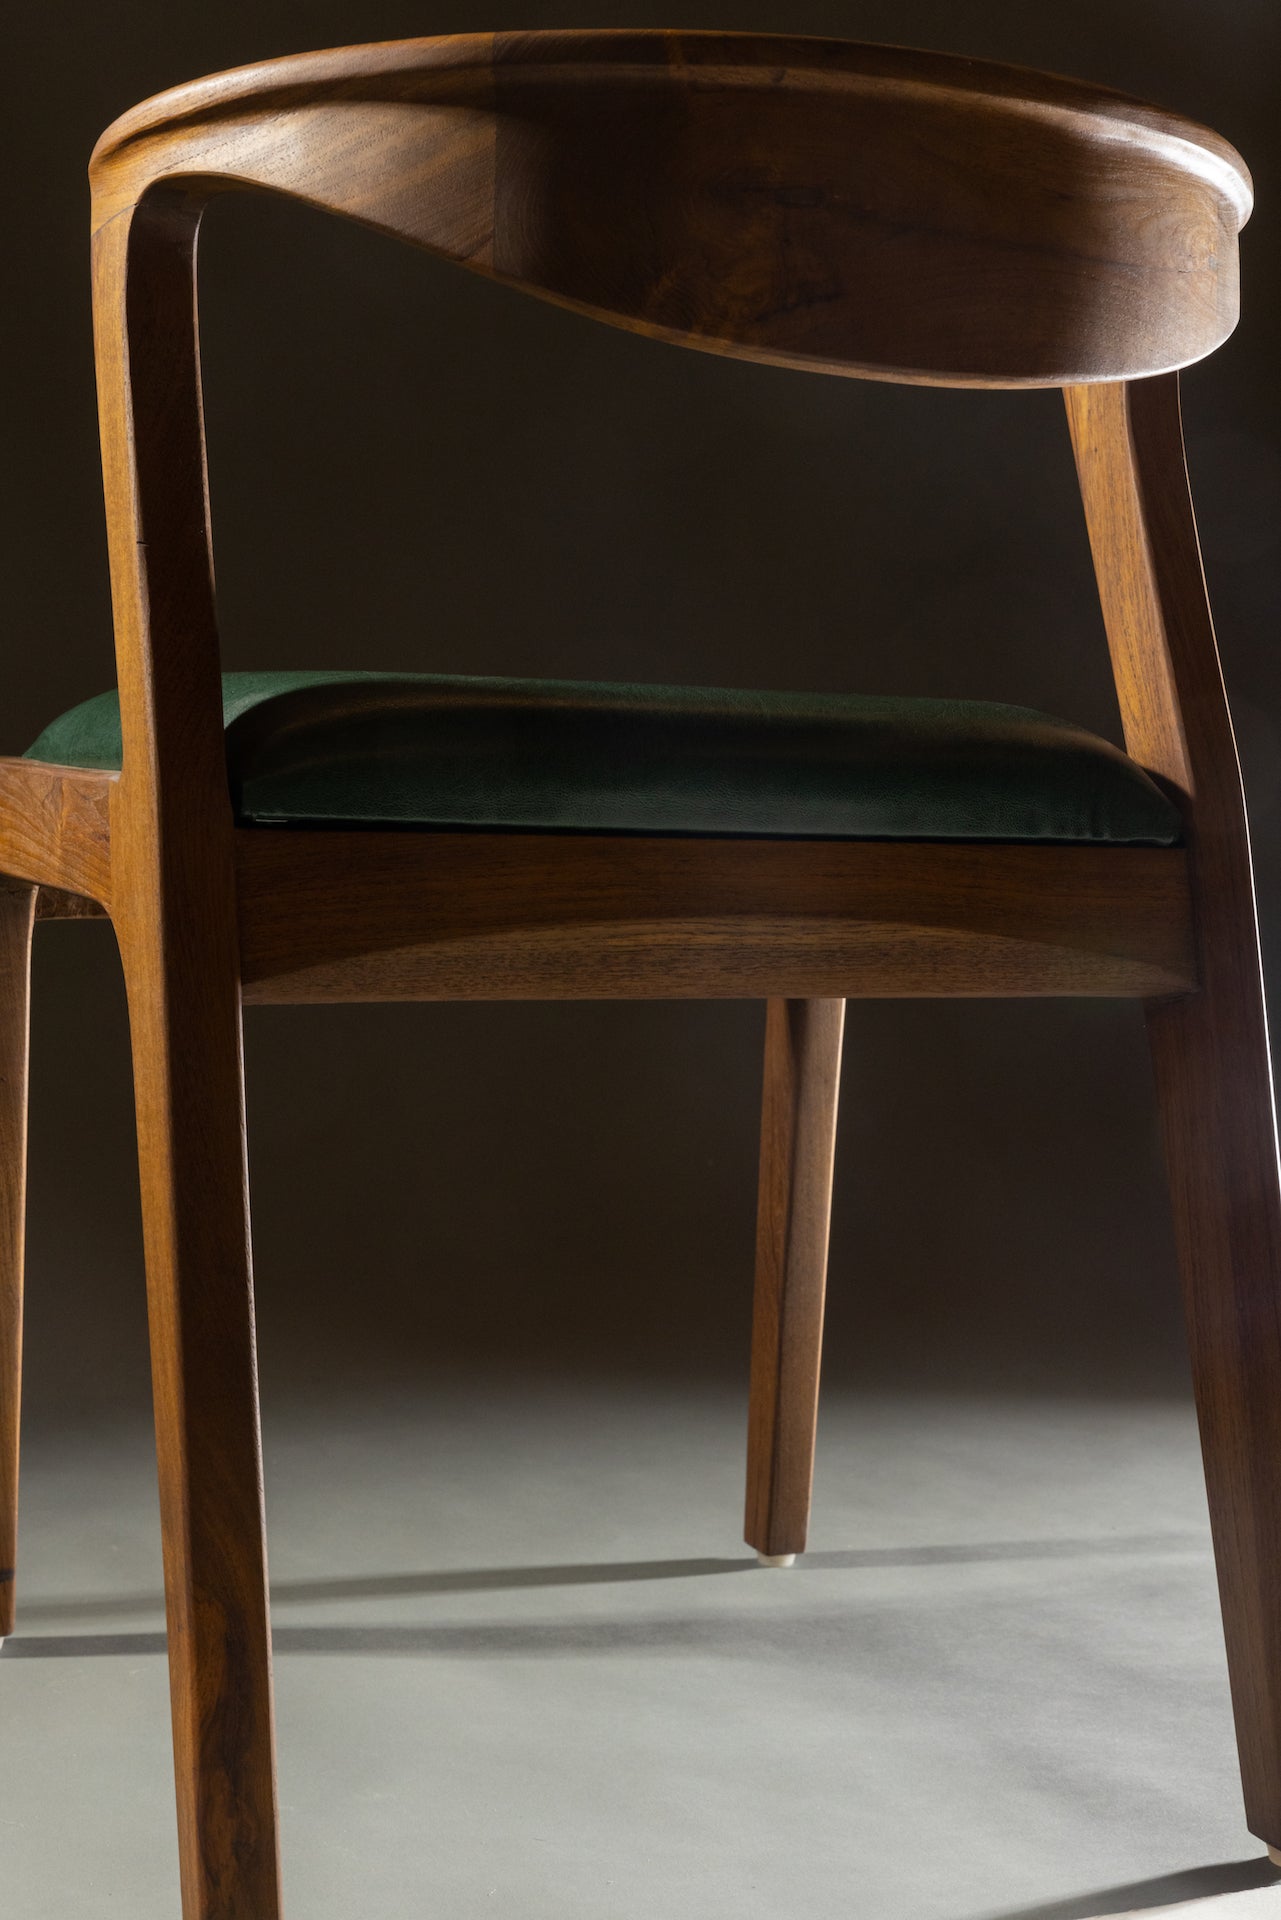 The Dilkash Dining Chair